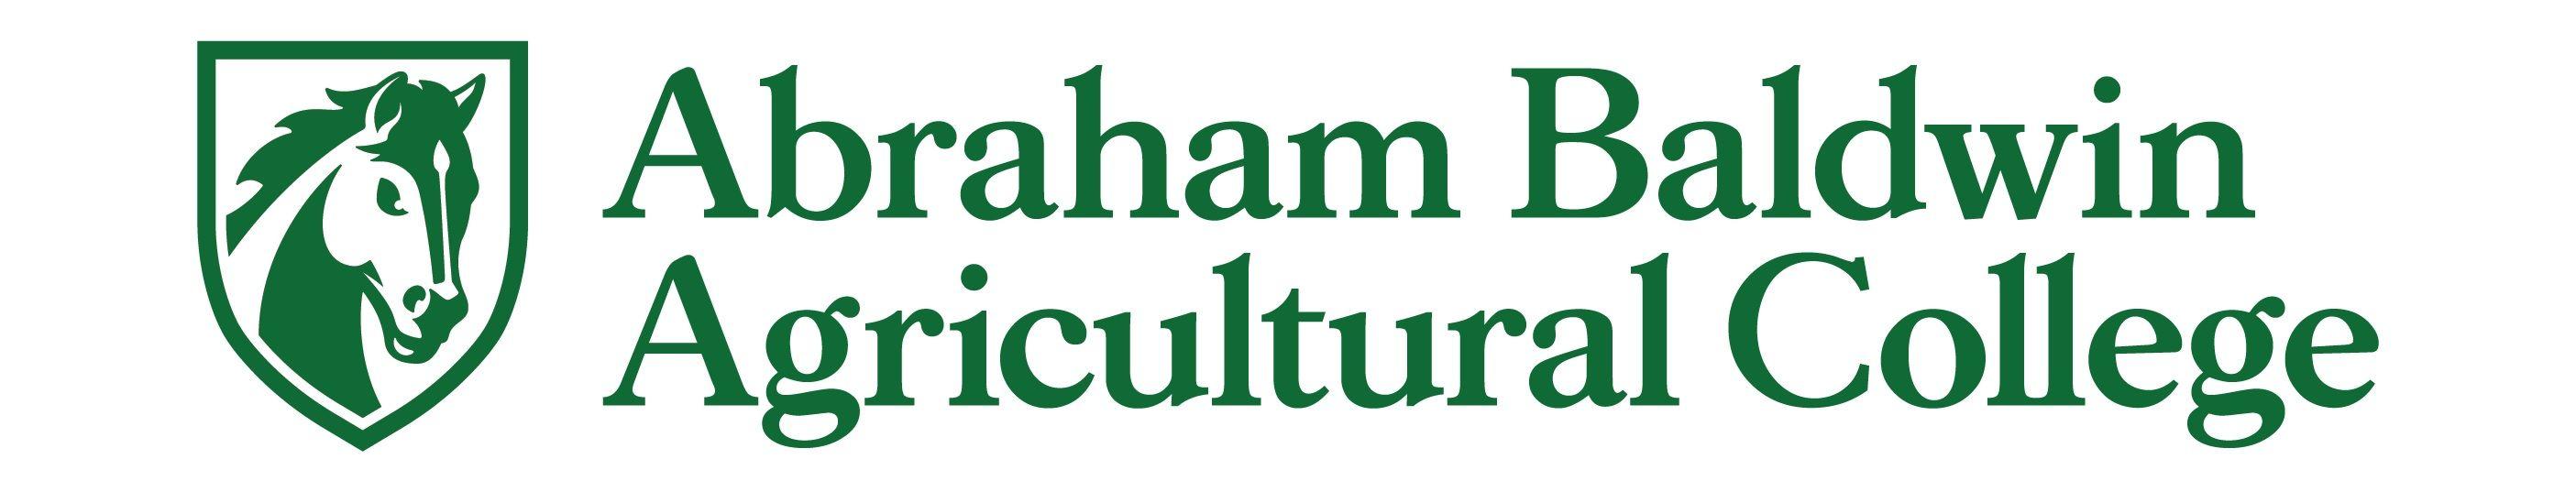 Abac Logo - Abraham Baldwin Agricultural College · GiveCampus